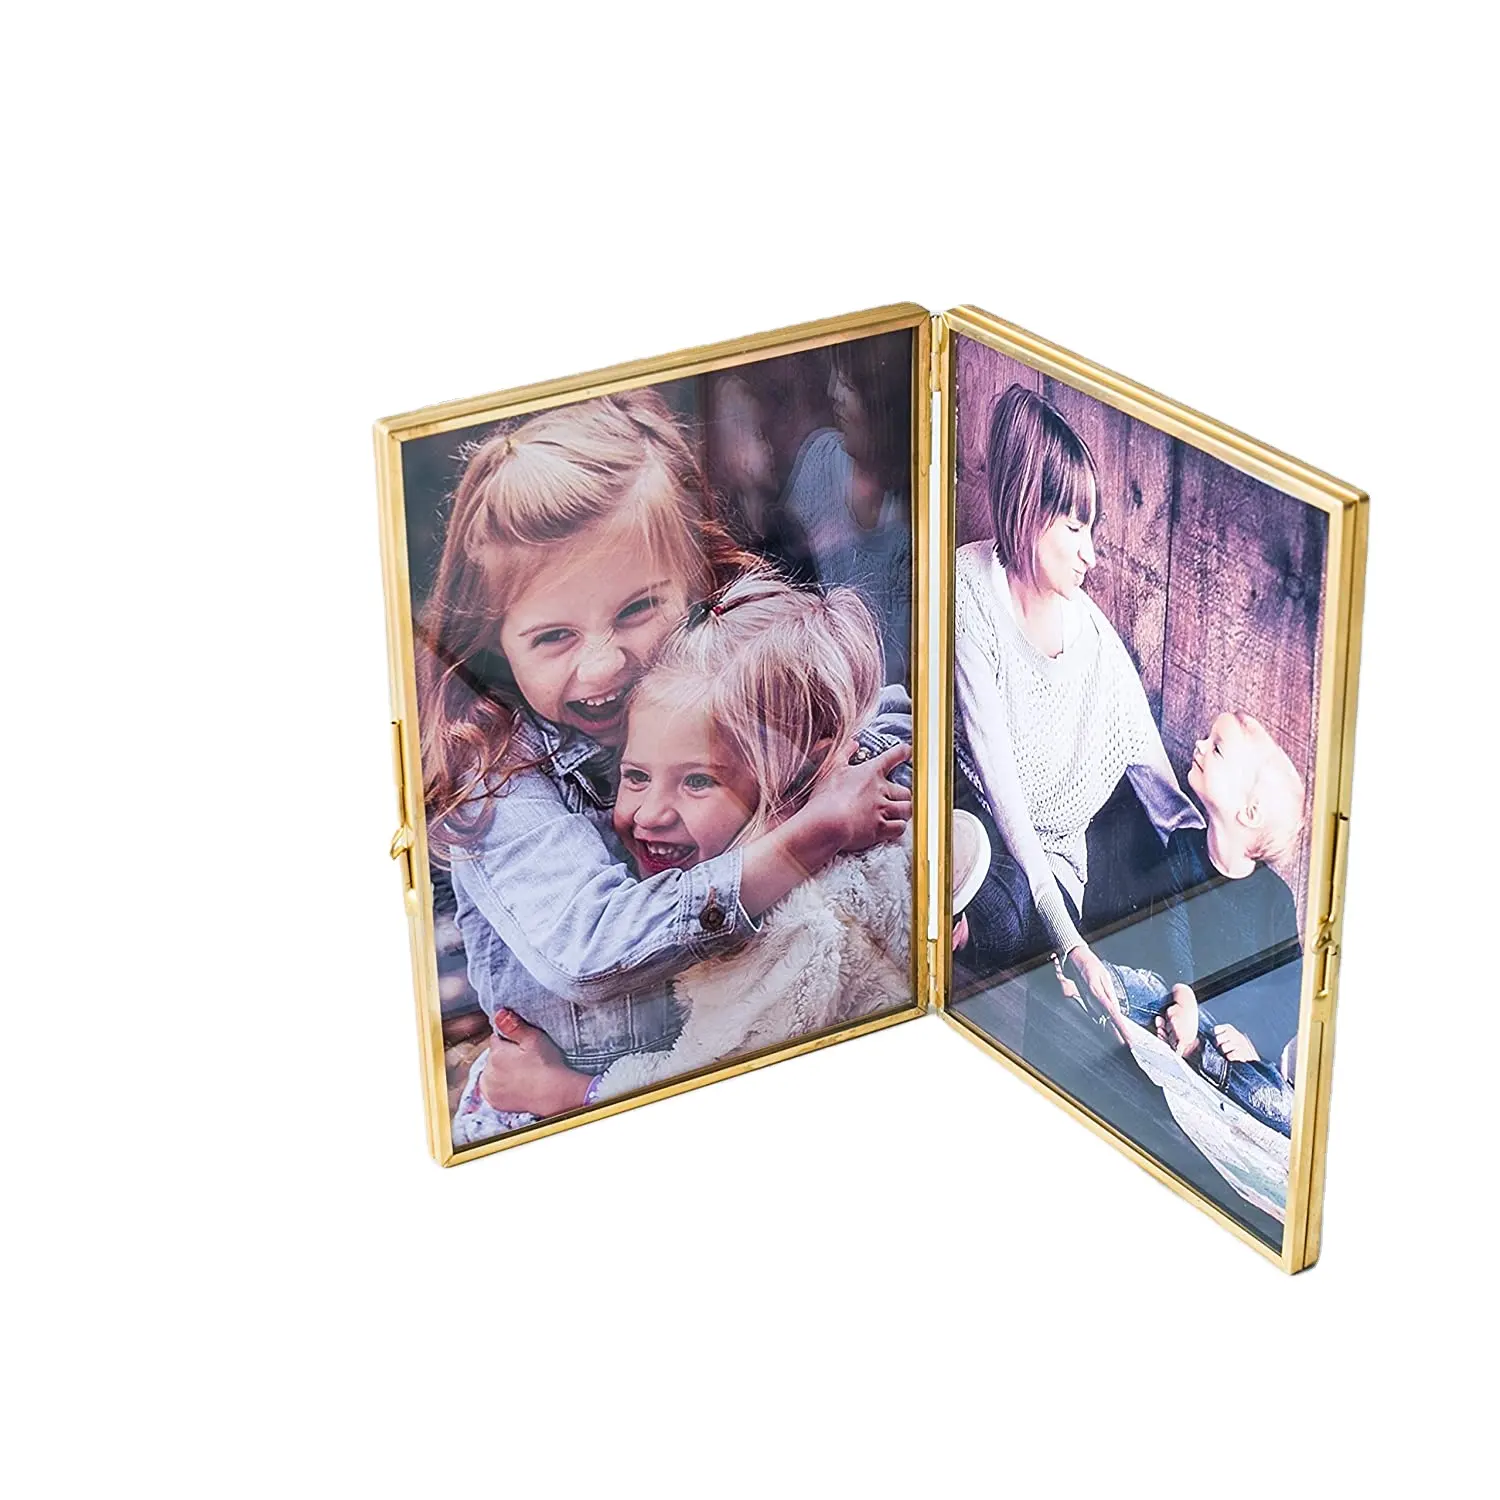 6 x 8 Brass Double Picture Frames Gold Double Pictures Frame with Pressed Glass Photo Frame